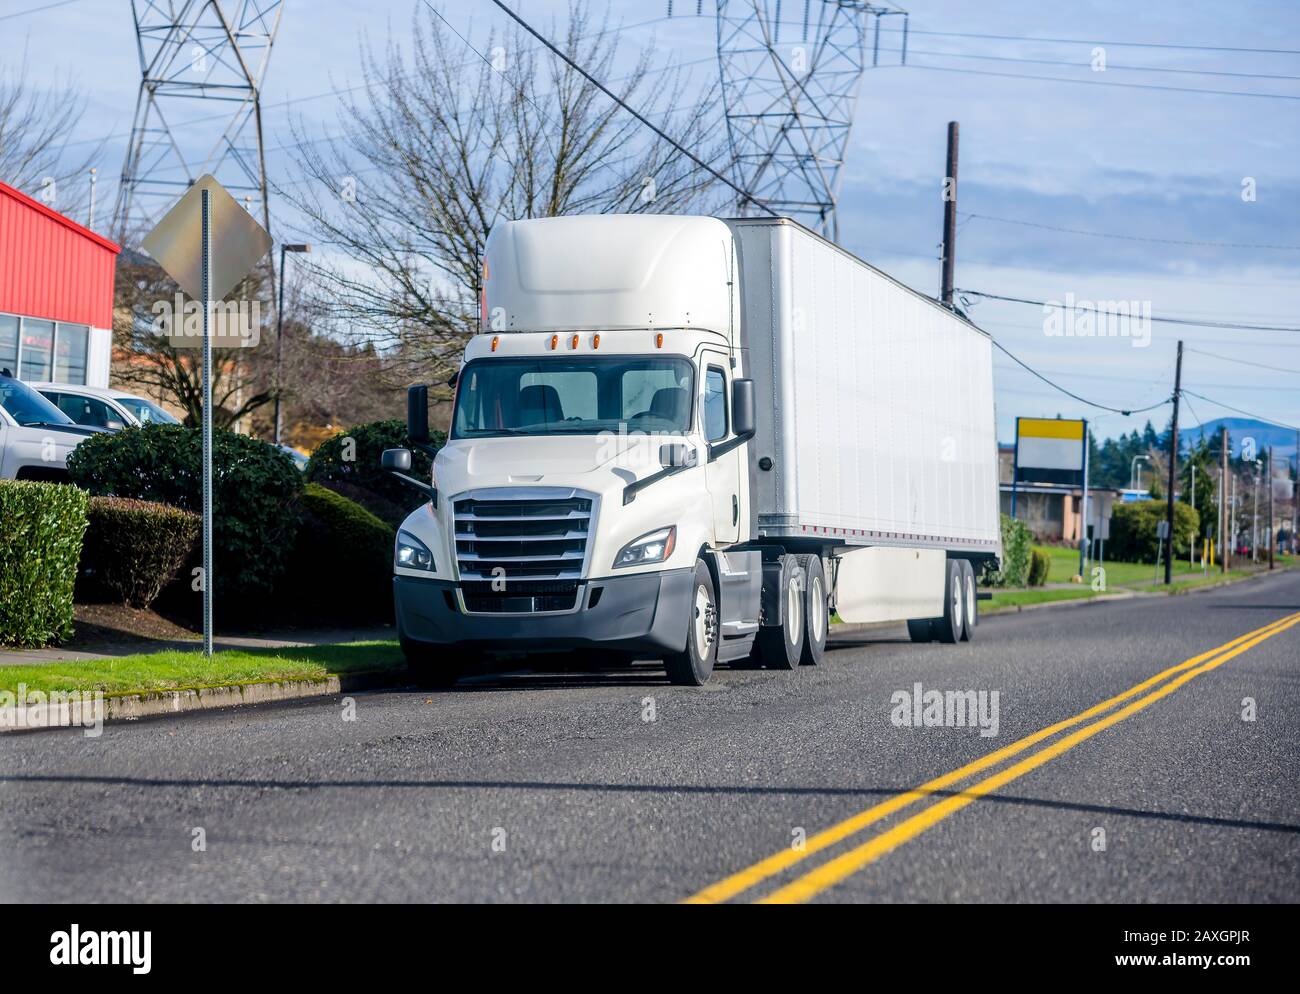 Bright White Bonnet Big rig long haul diesel Semi Truck with day cab and spoiler configuration for improve aerodynamics transporting Commercial Cargo Stock Photo